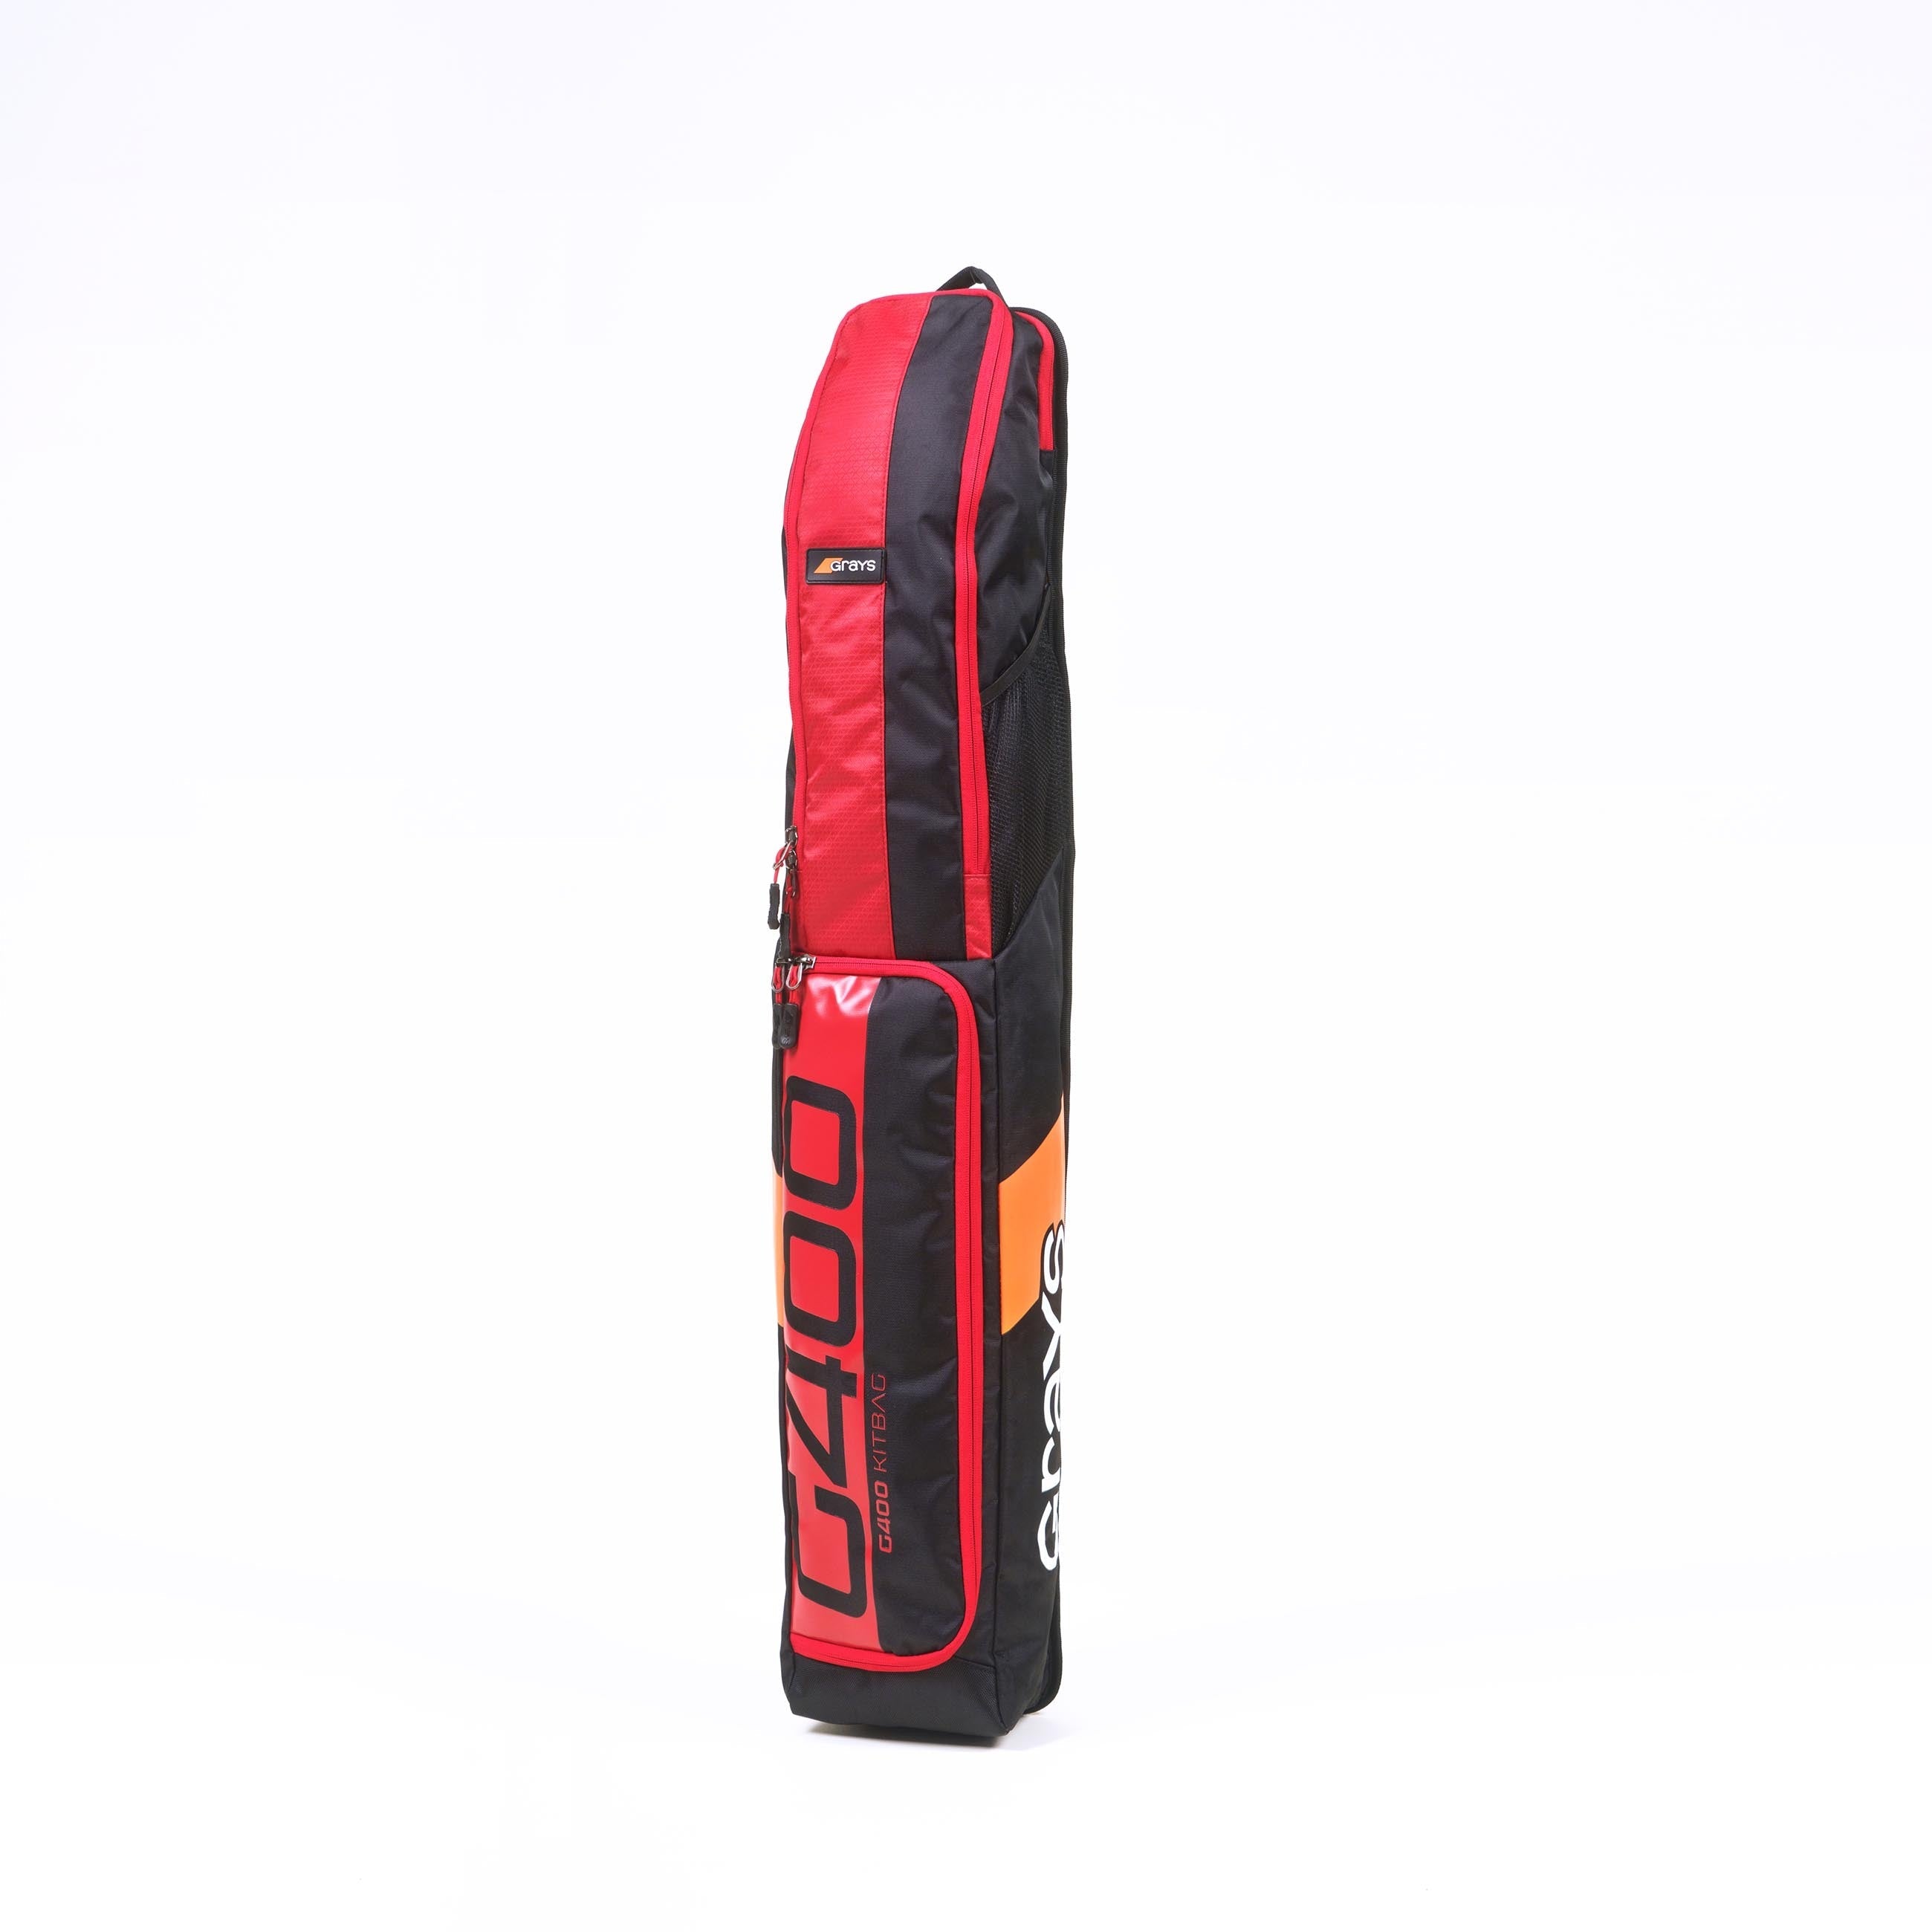 HHBH24Bags G400 Stickbag Black Red Front